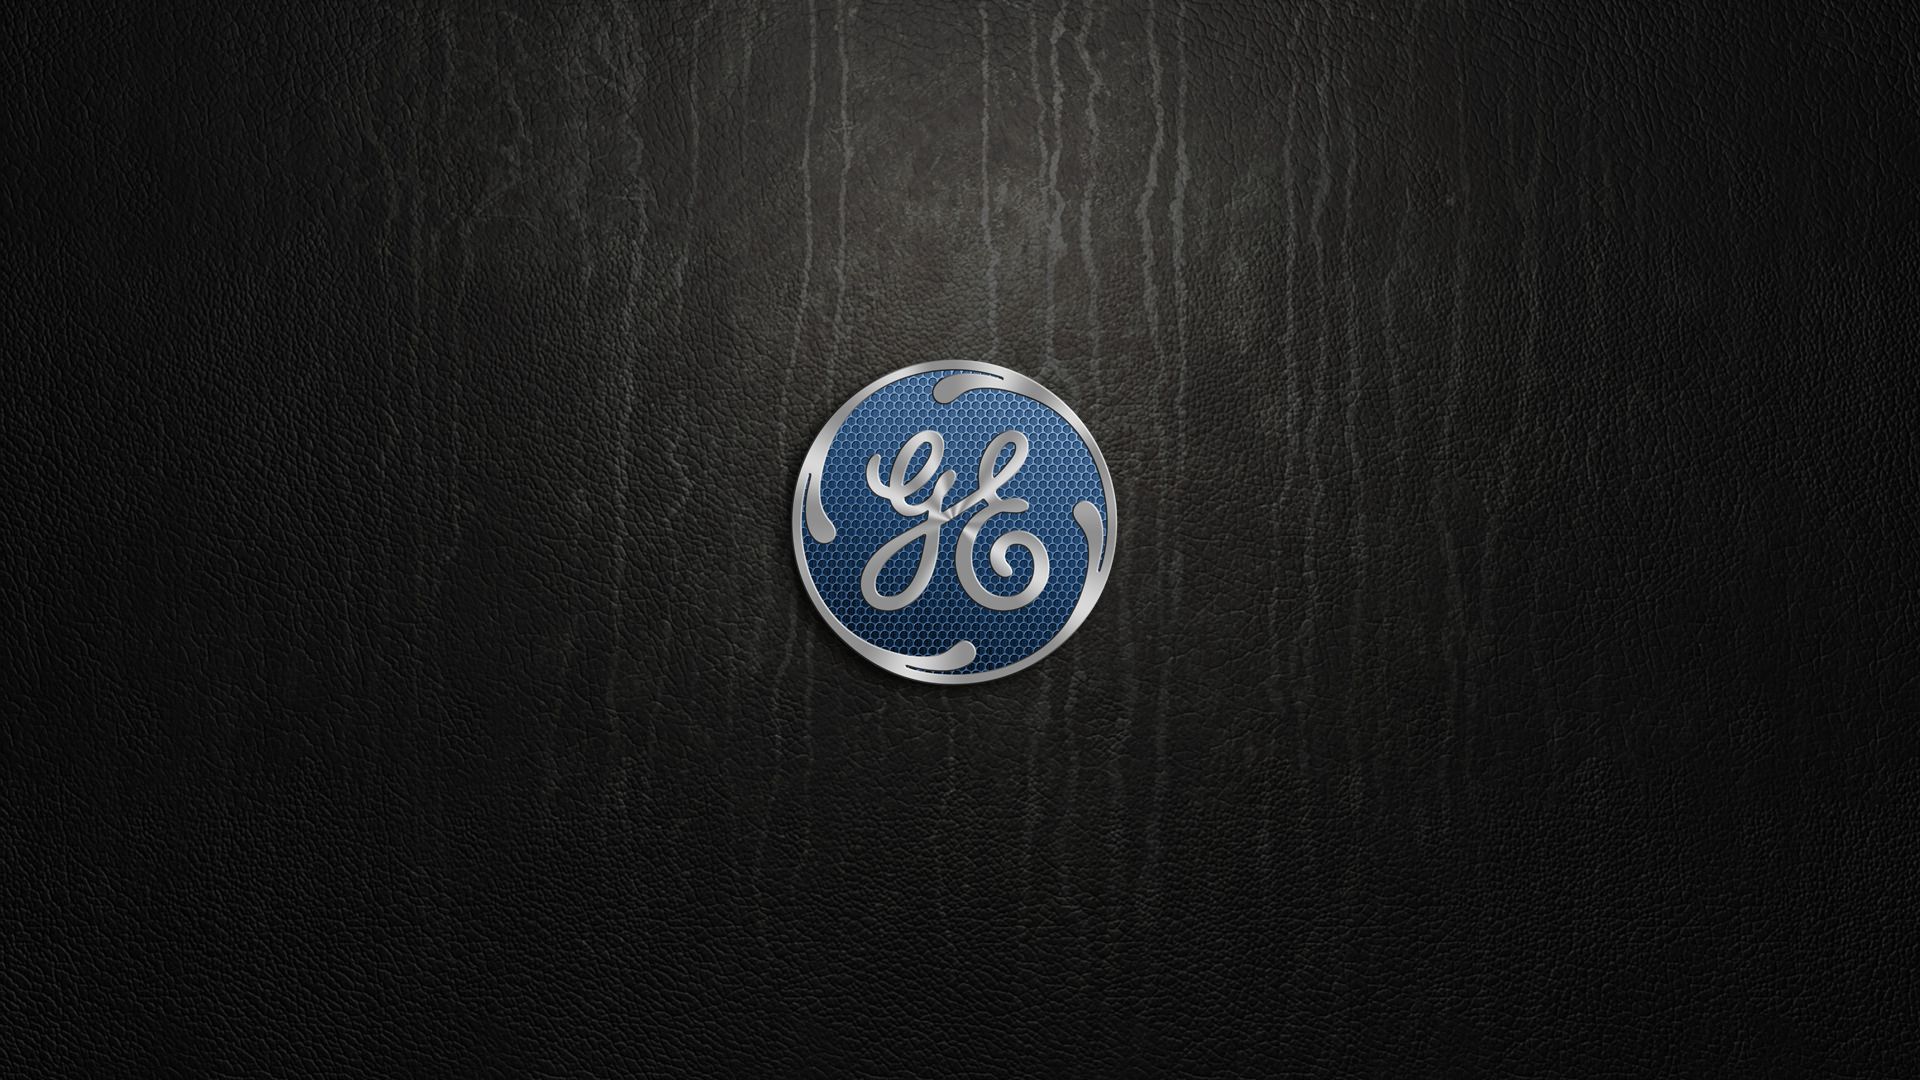 general electric, products